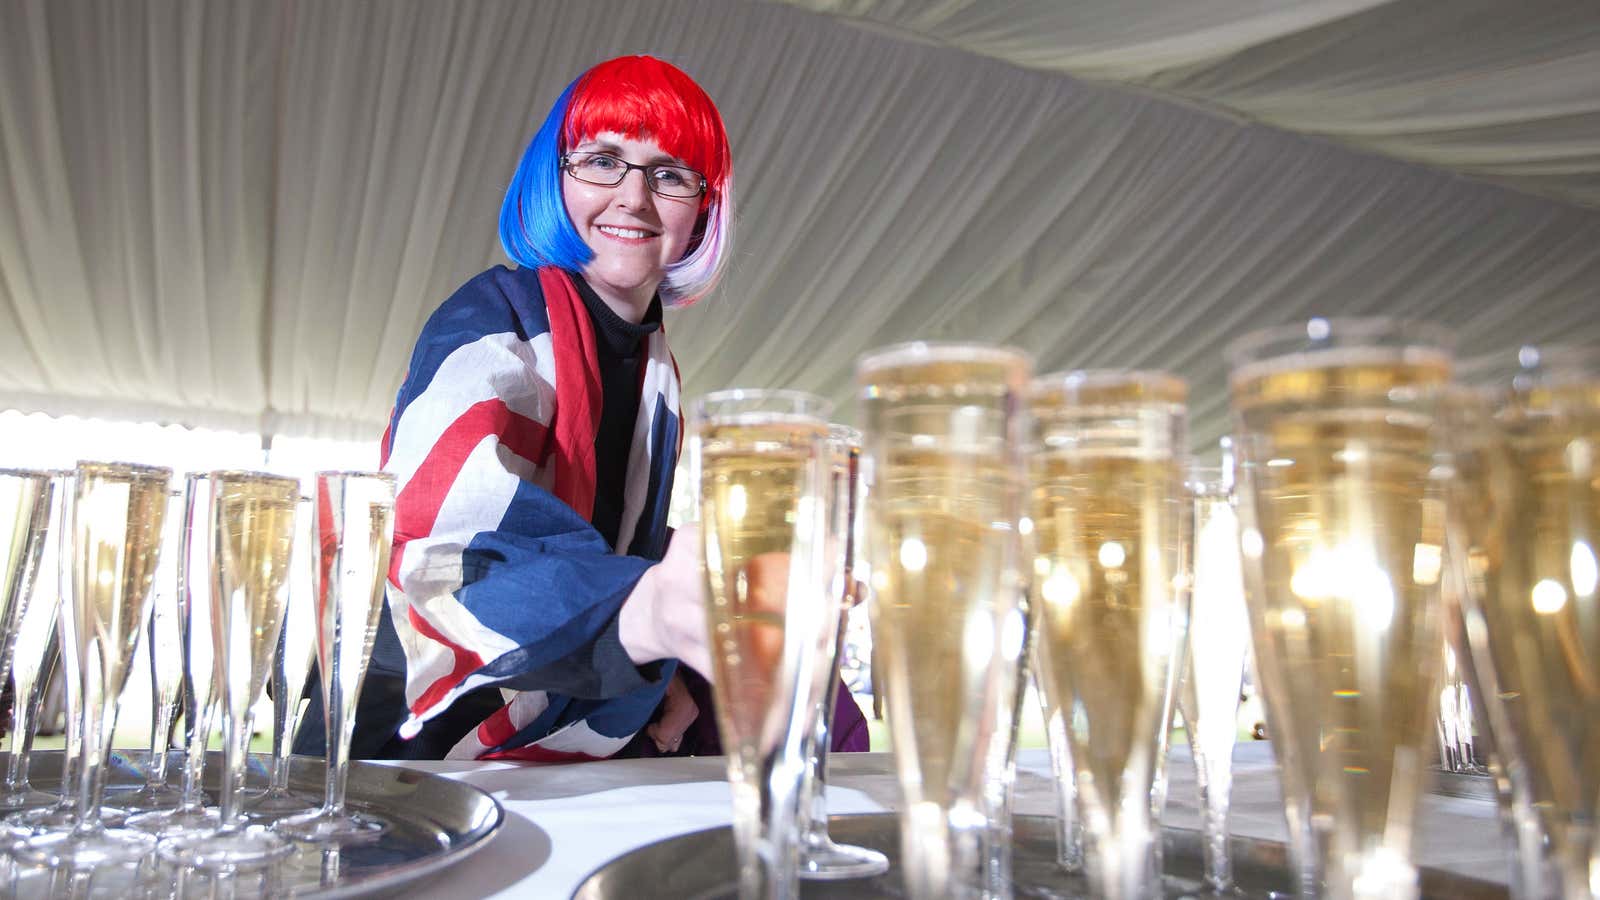 A Queen’s Jubilee enthusiast. Events like the Jubilee and the Royal Wedding have increased interest in English bubbly.